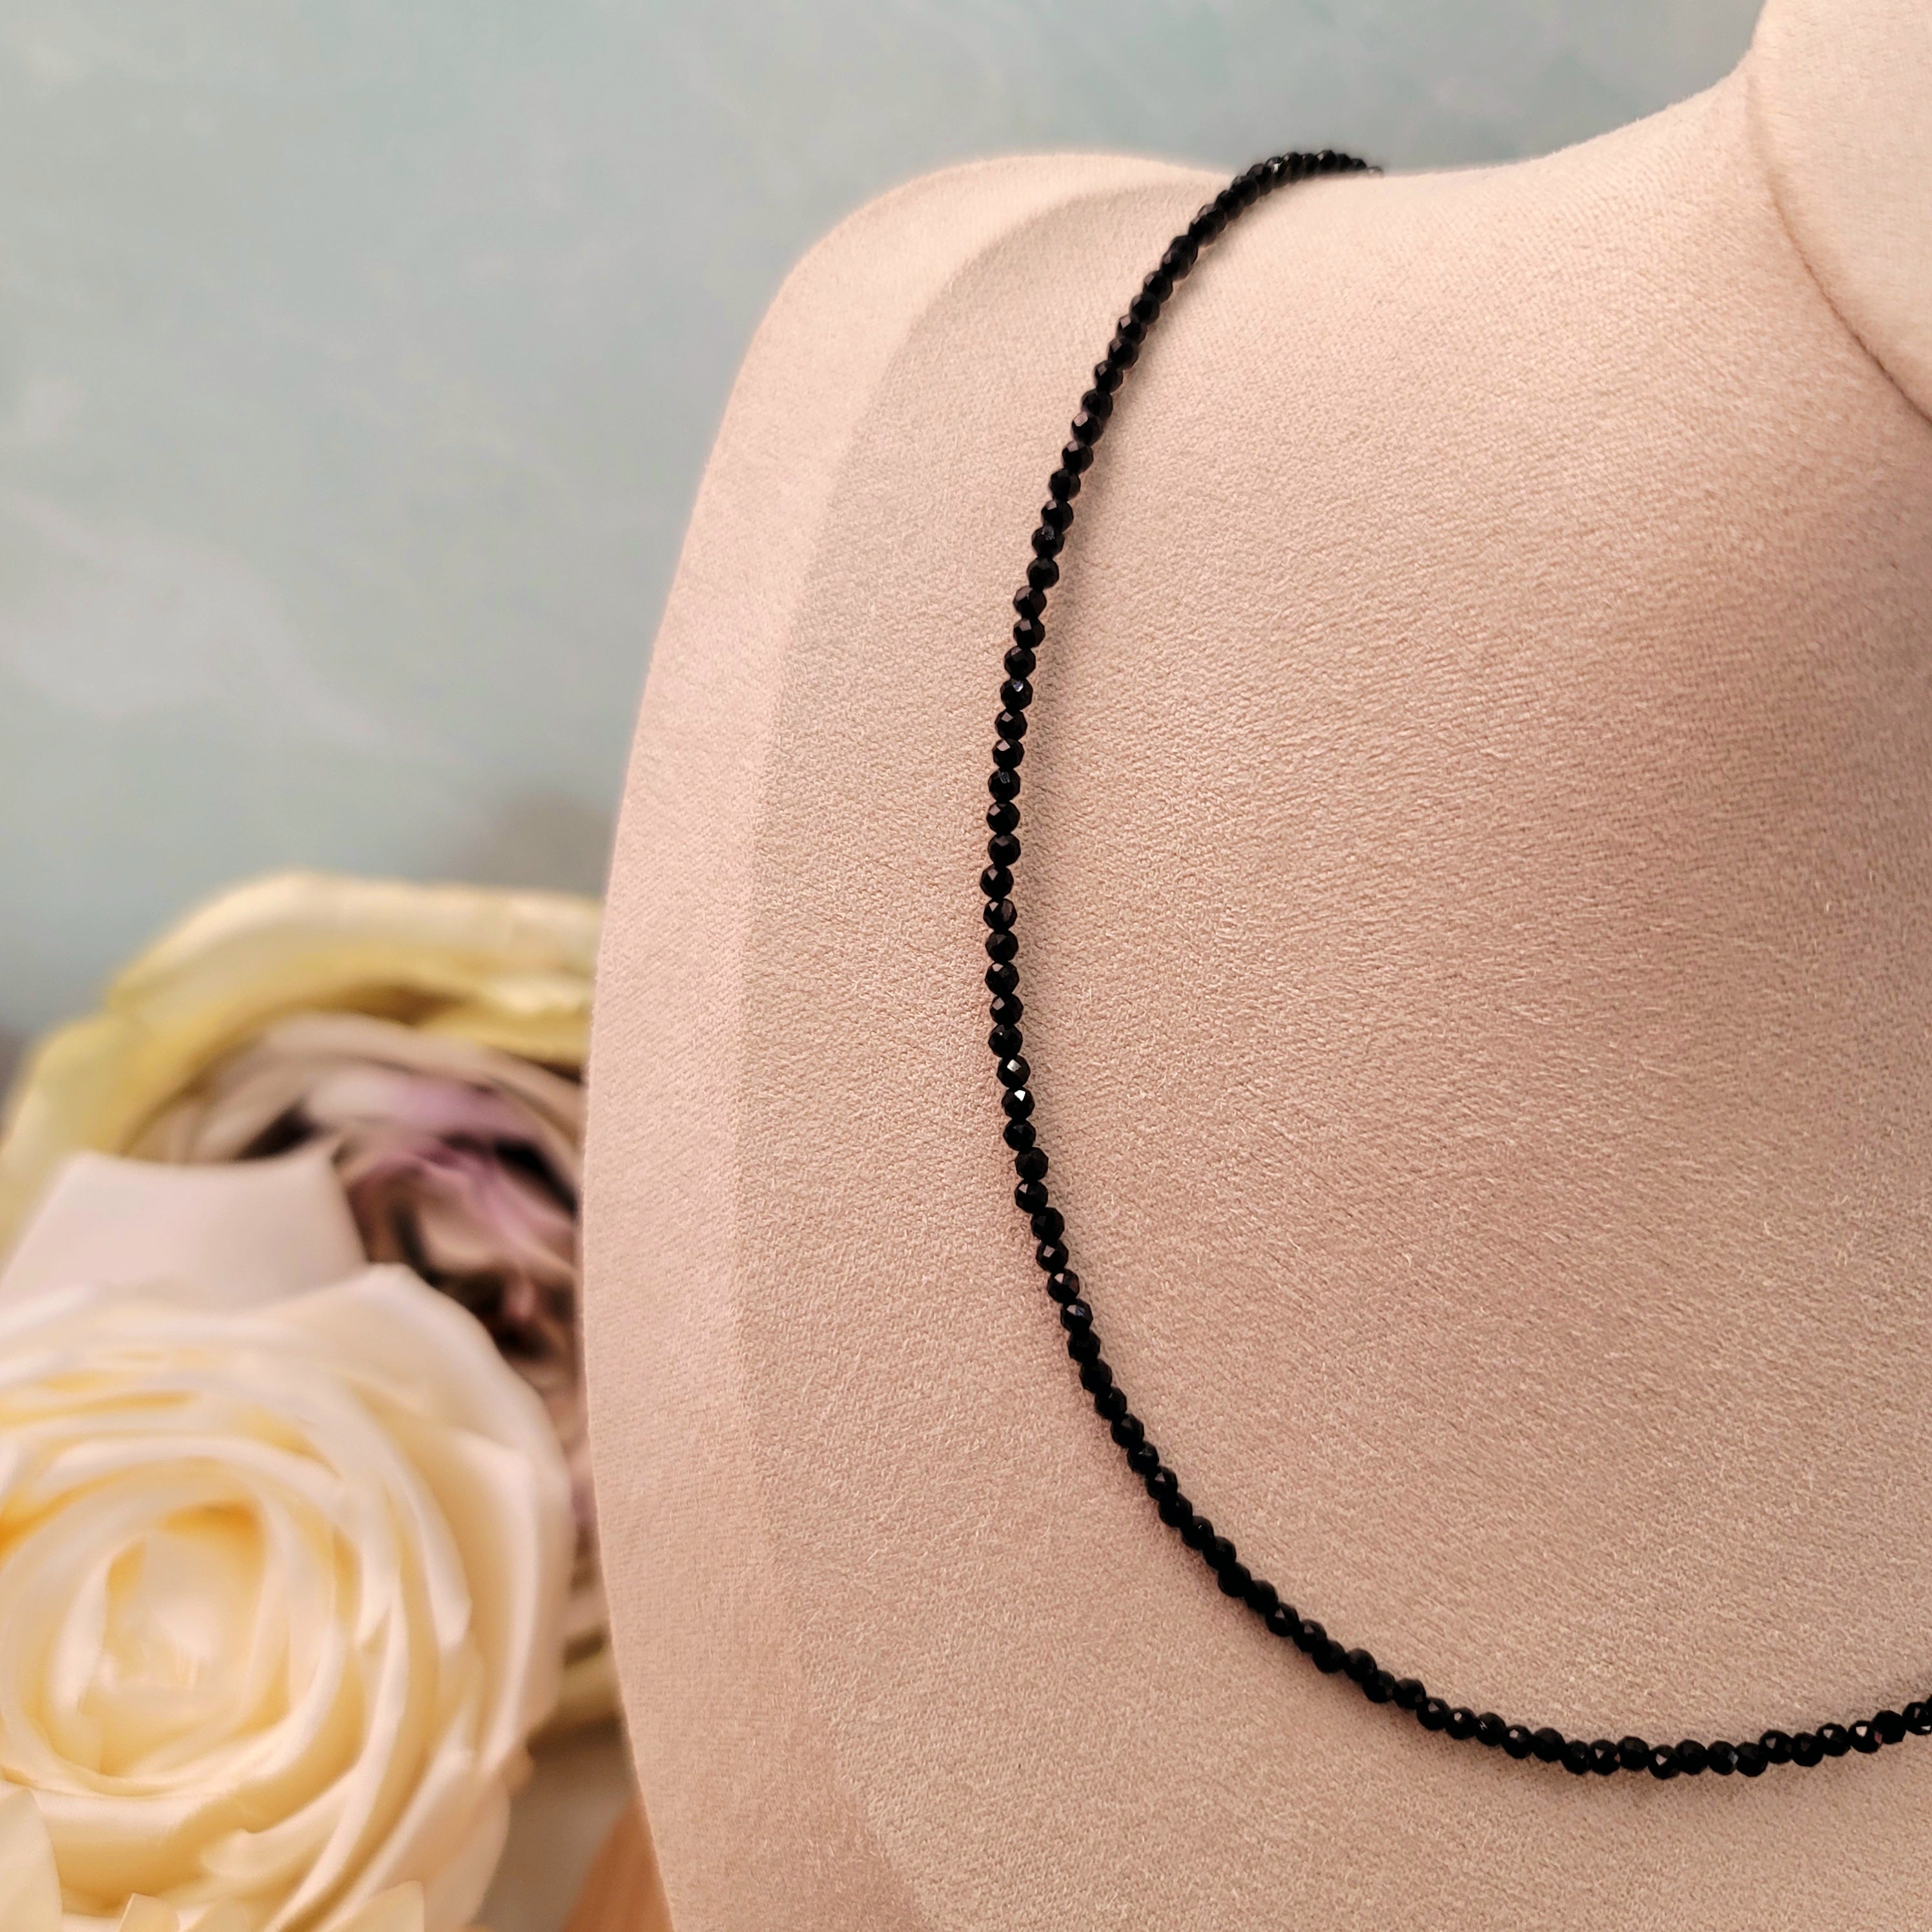 Black Tourmaline Micro Faceted Choker/Layering Necklace for Protection & Purification